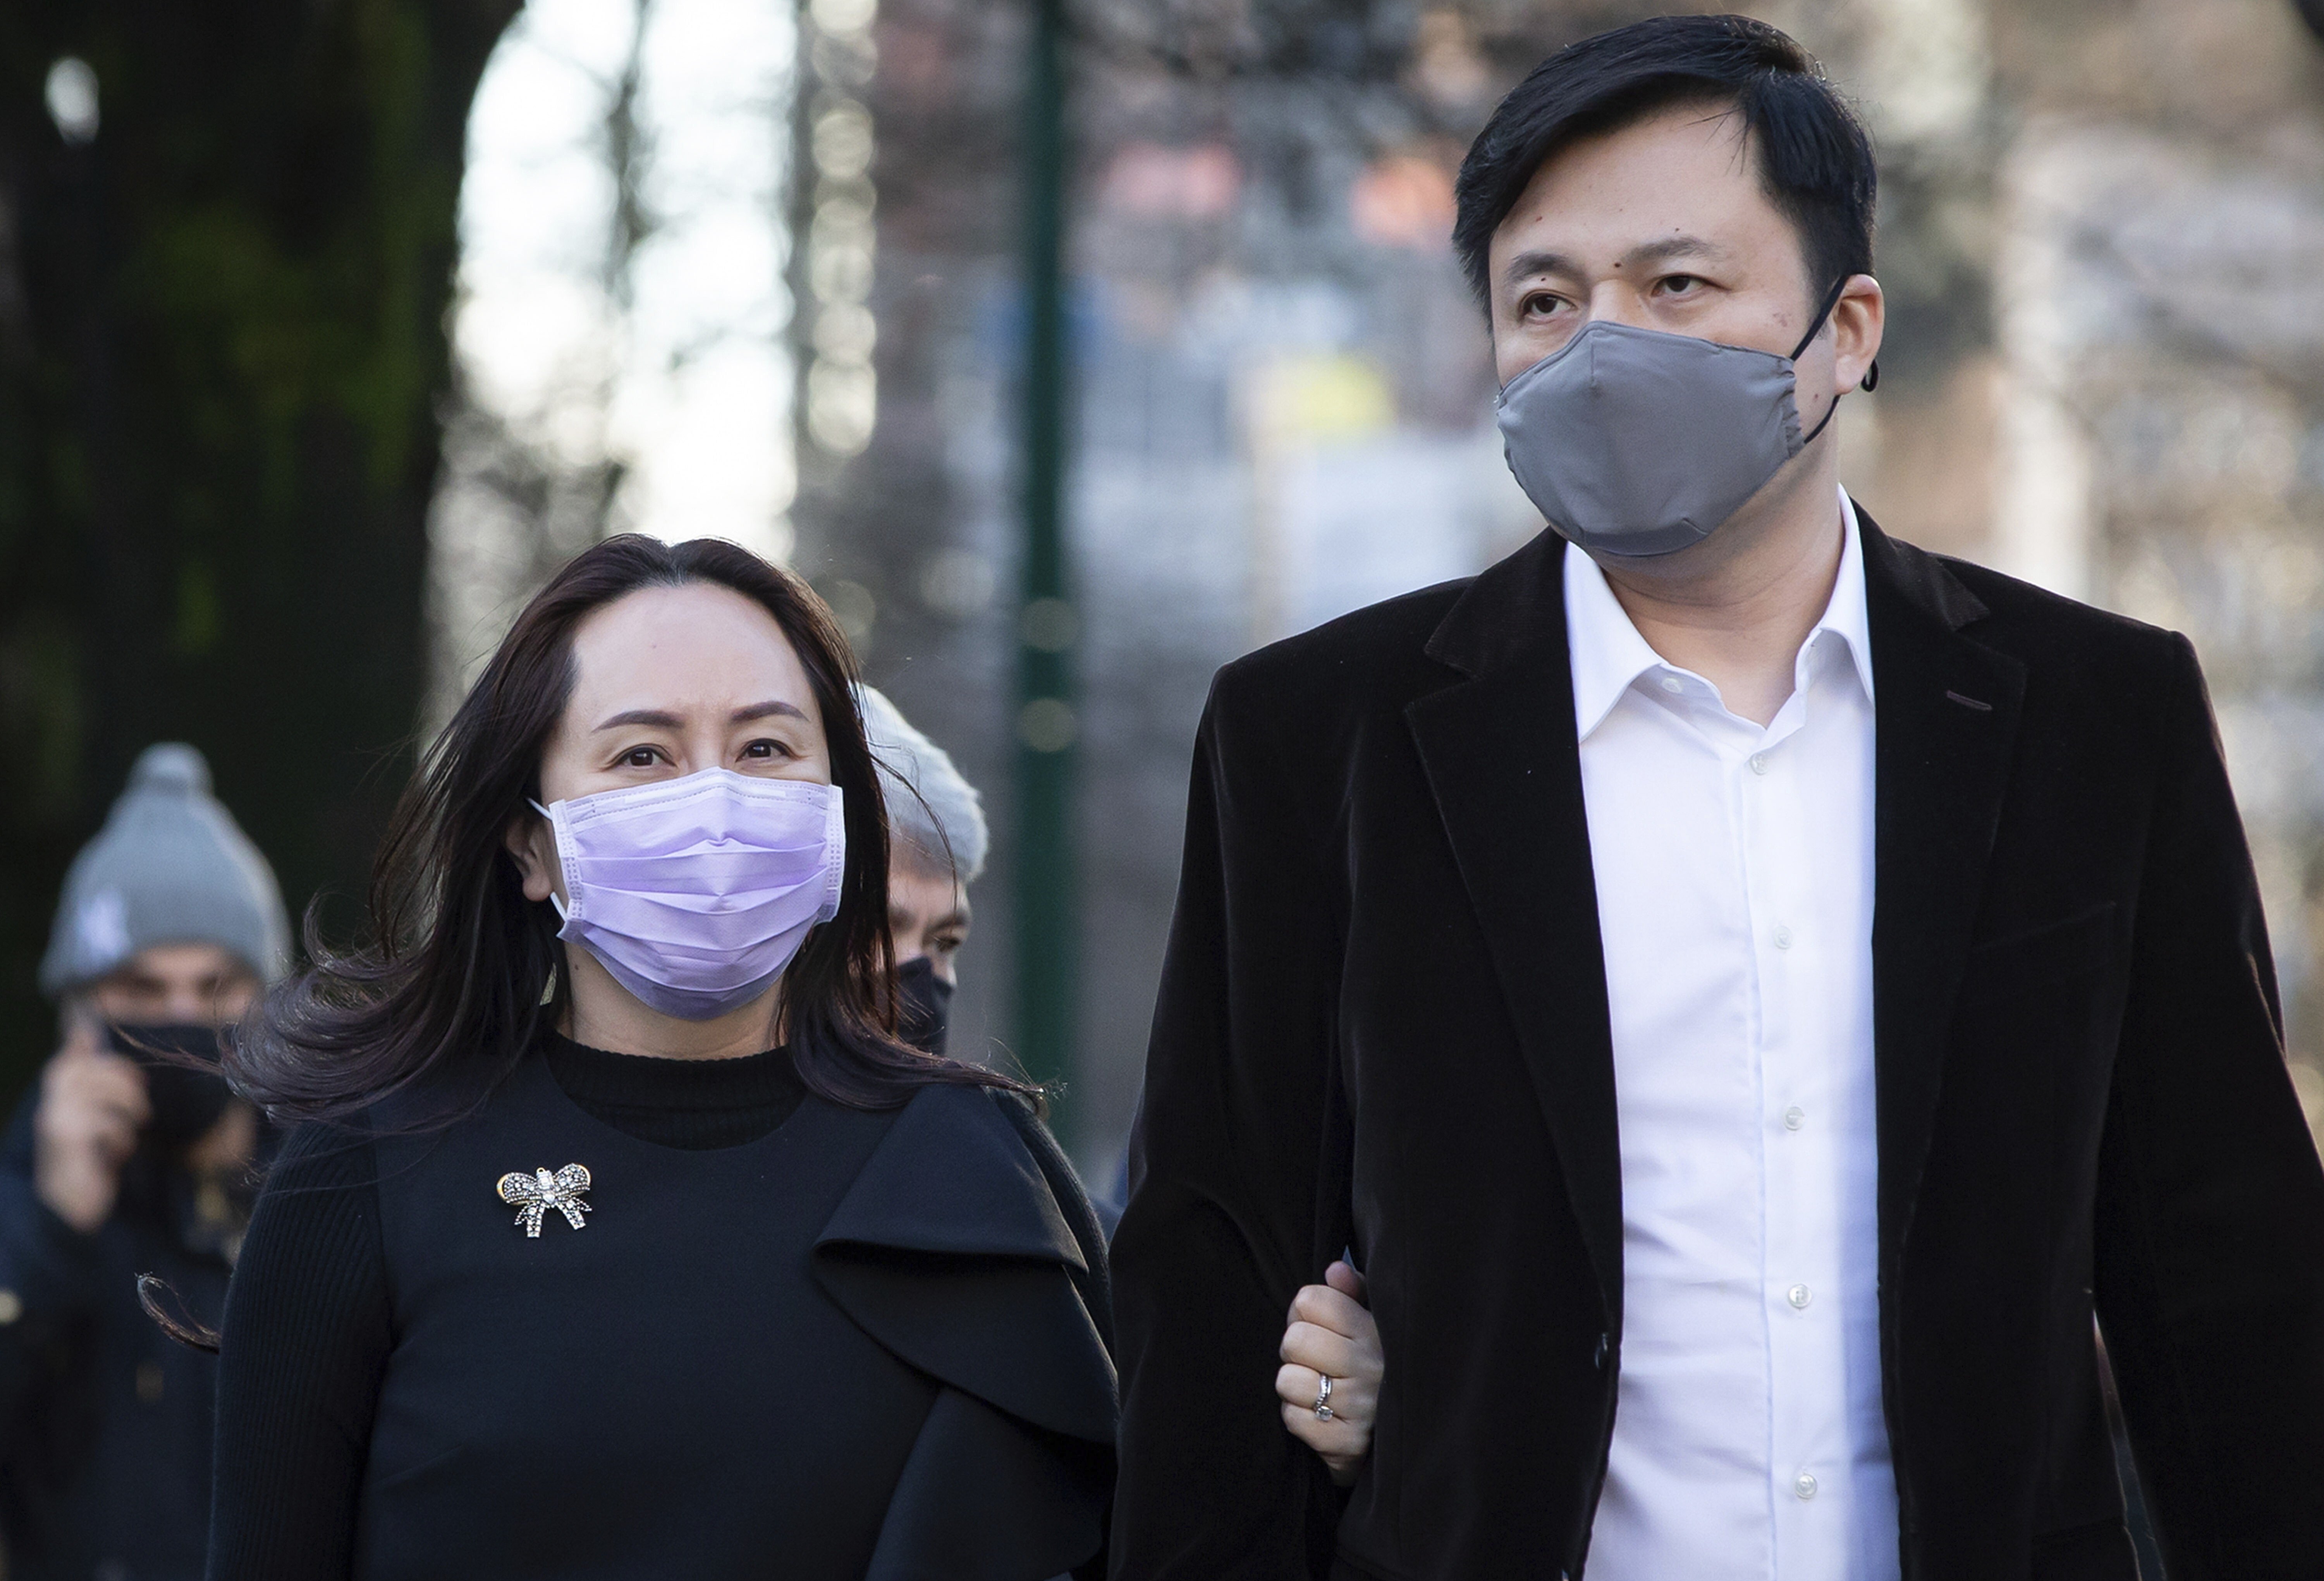 Meng Wanzhou and her husband, Liu Xiaozong, during a break from a court hearing in Vancouver, British Columbia, on December 9, 2020. Photo: AP